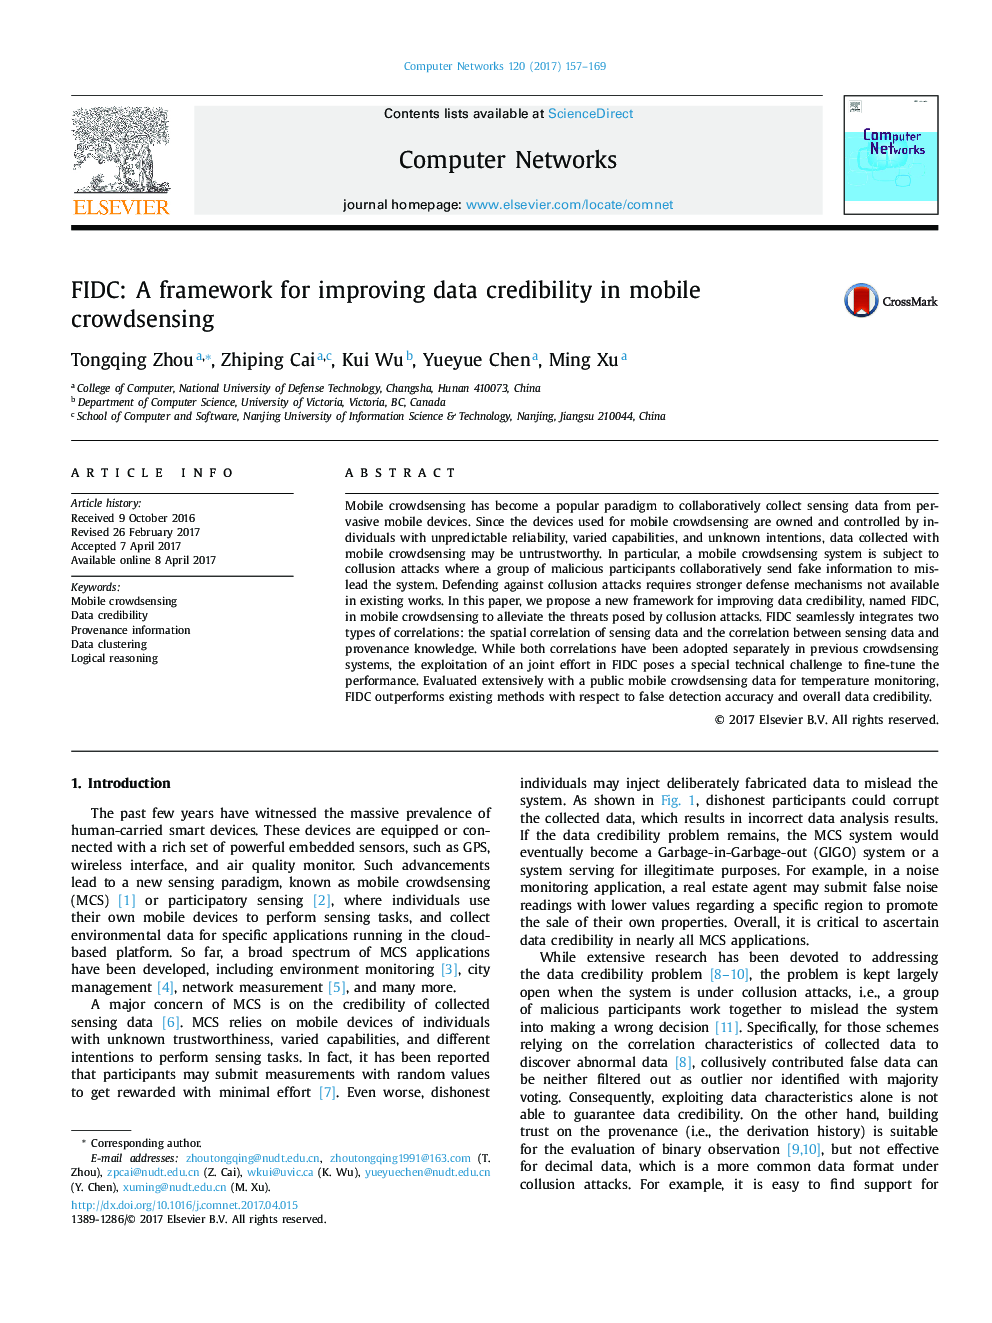 FIDC: A framework for improving data credibility in mobile crowdsensing